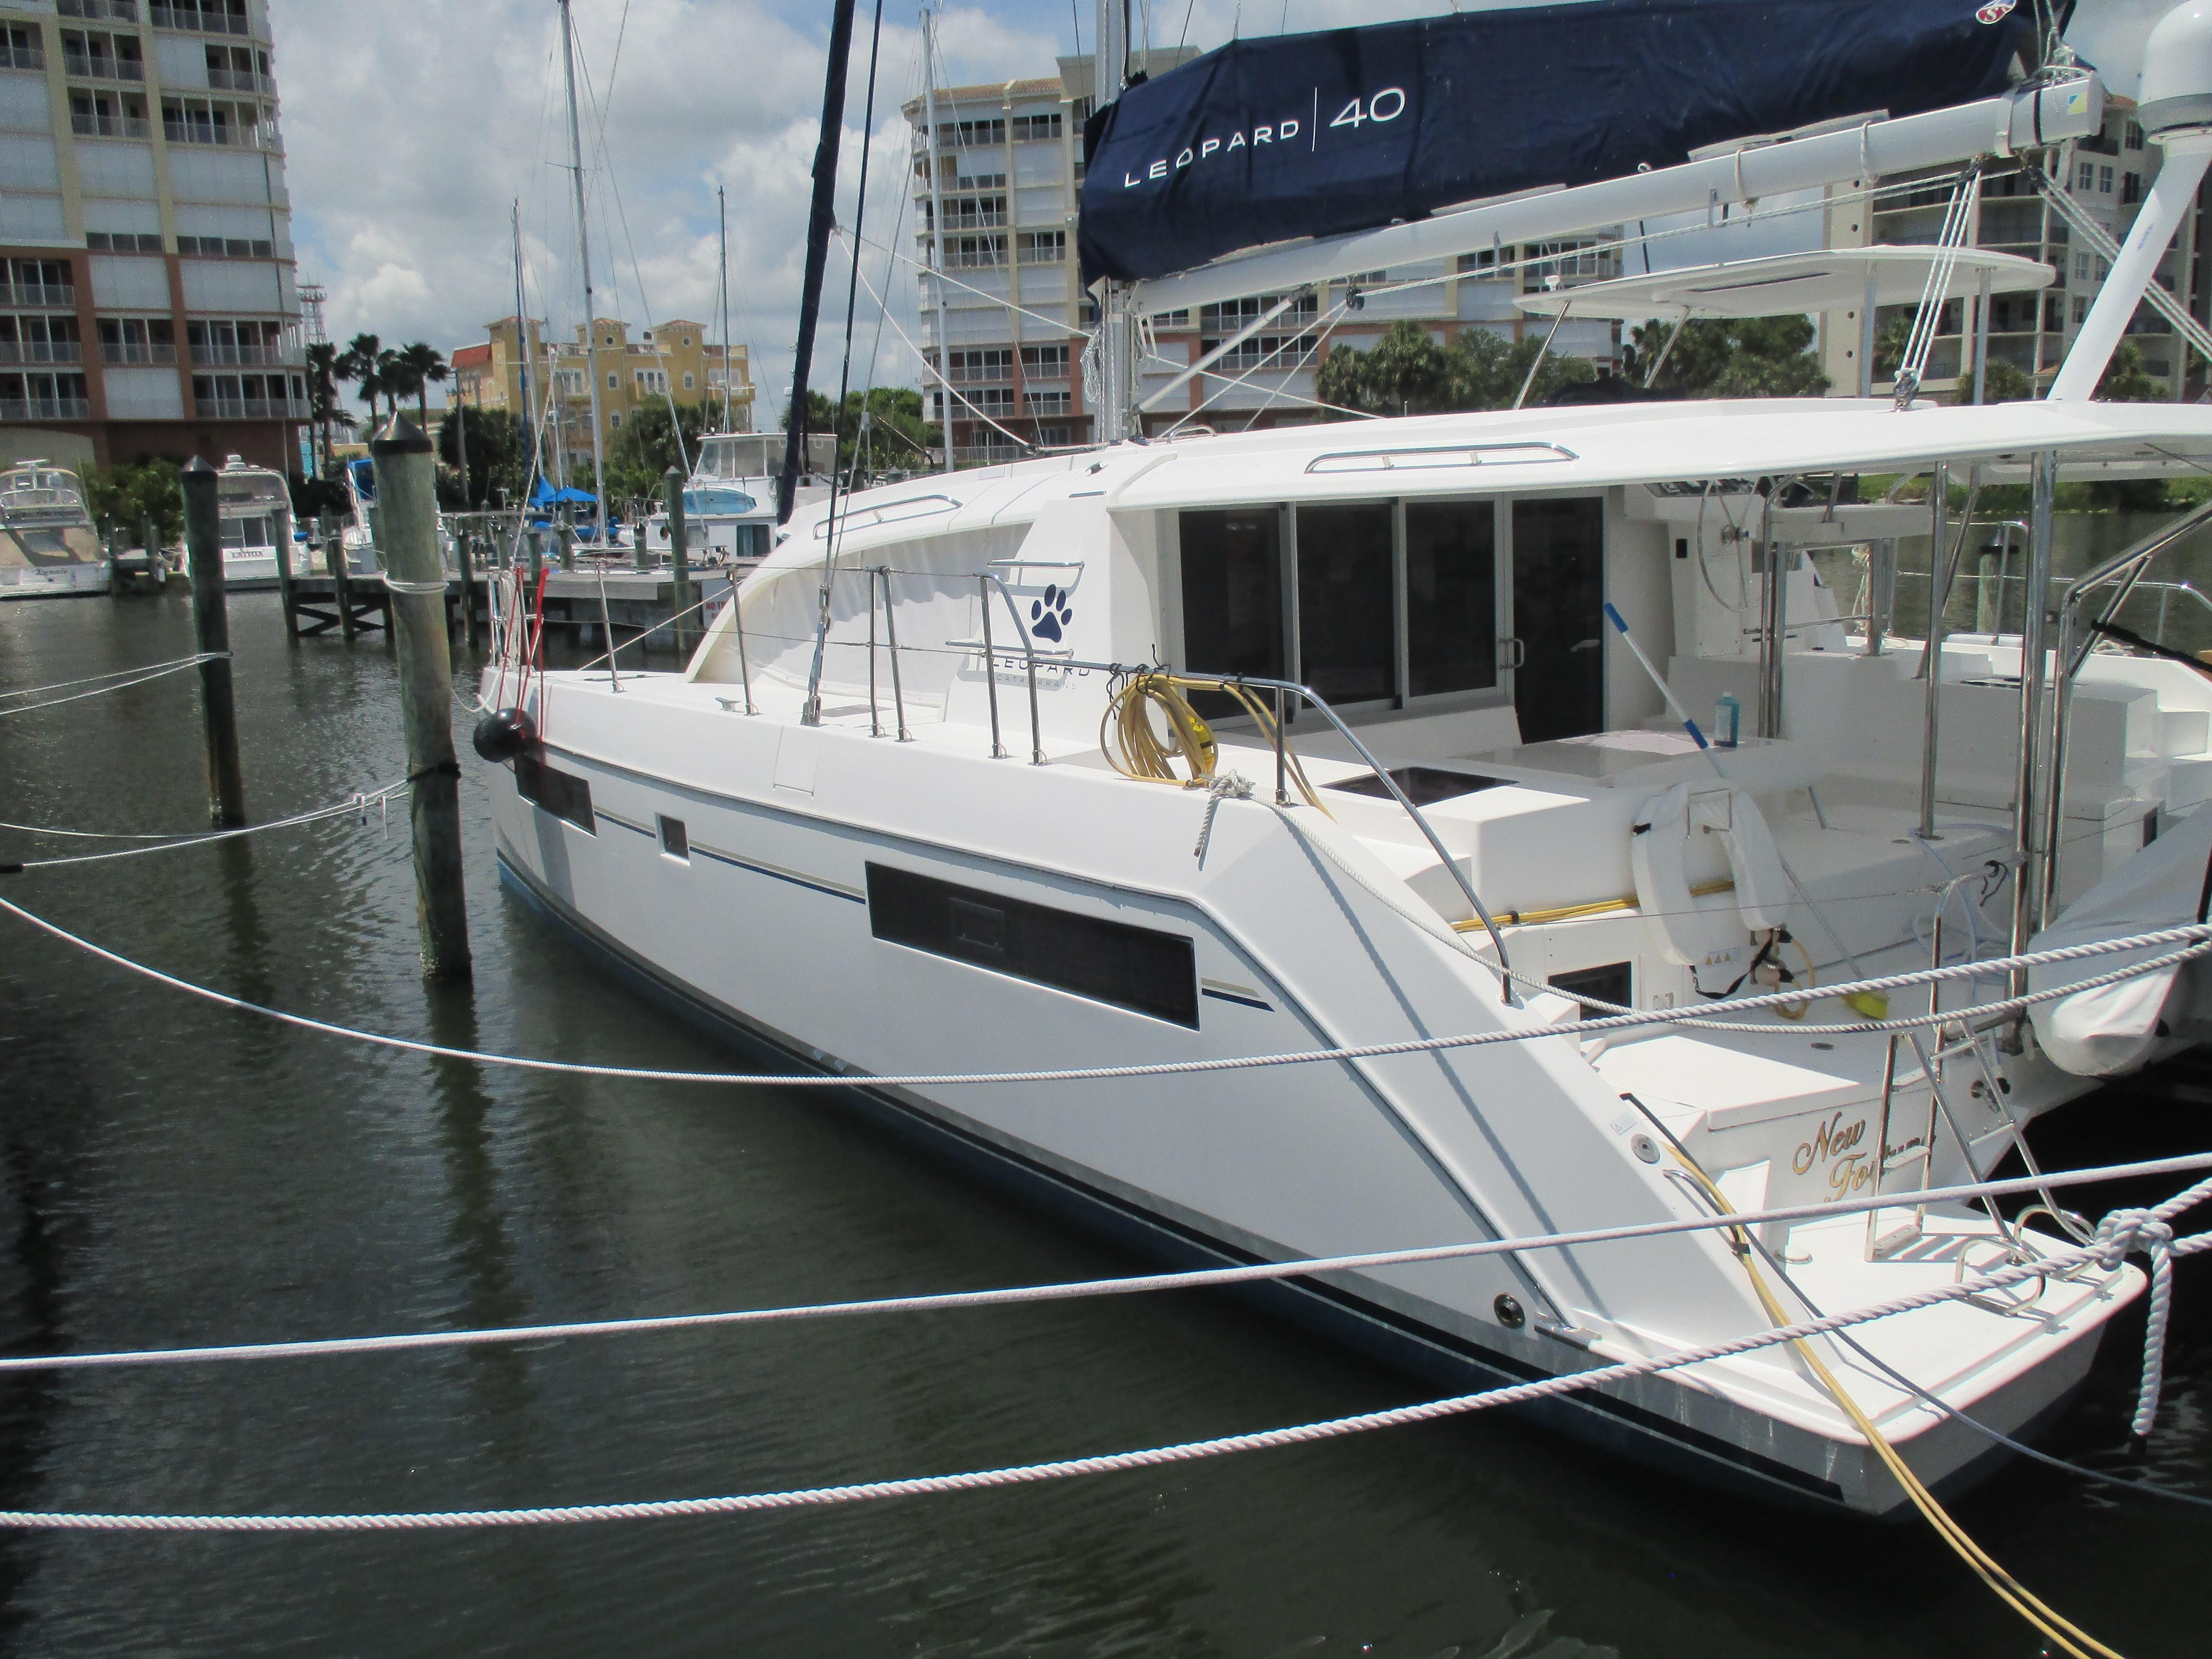 Used Sail Catamaran for Sale 2017 Leopard 40 Boat Highlights